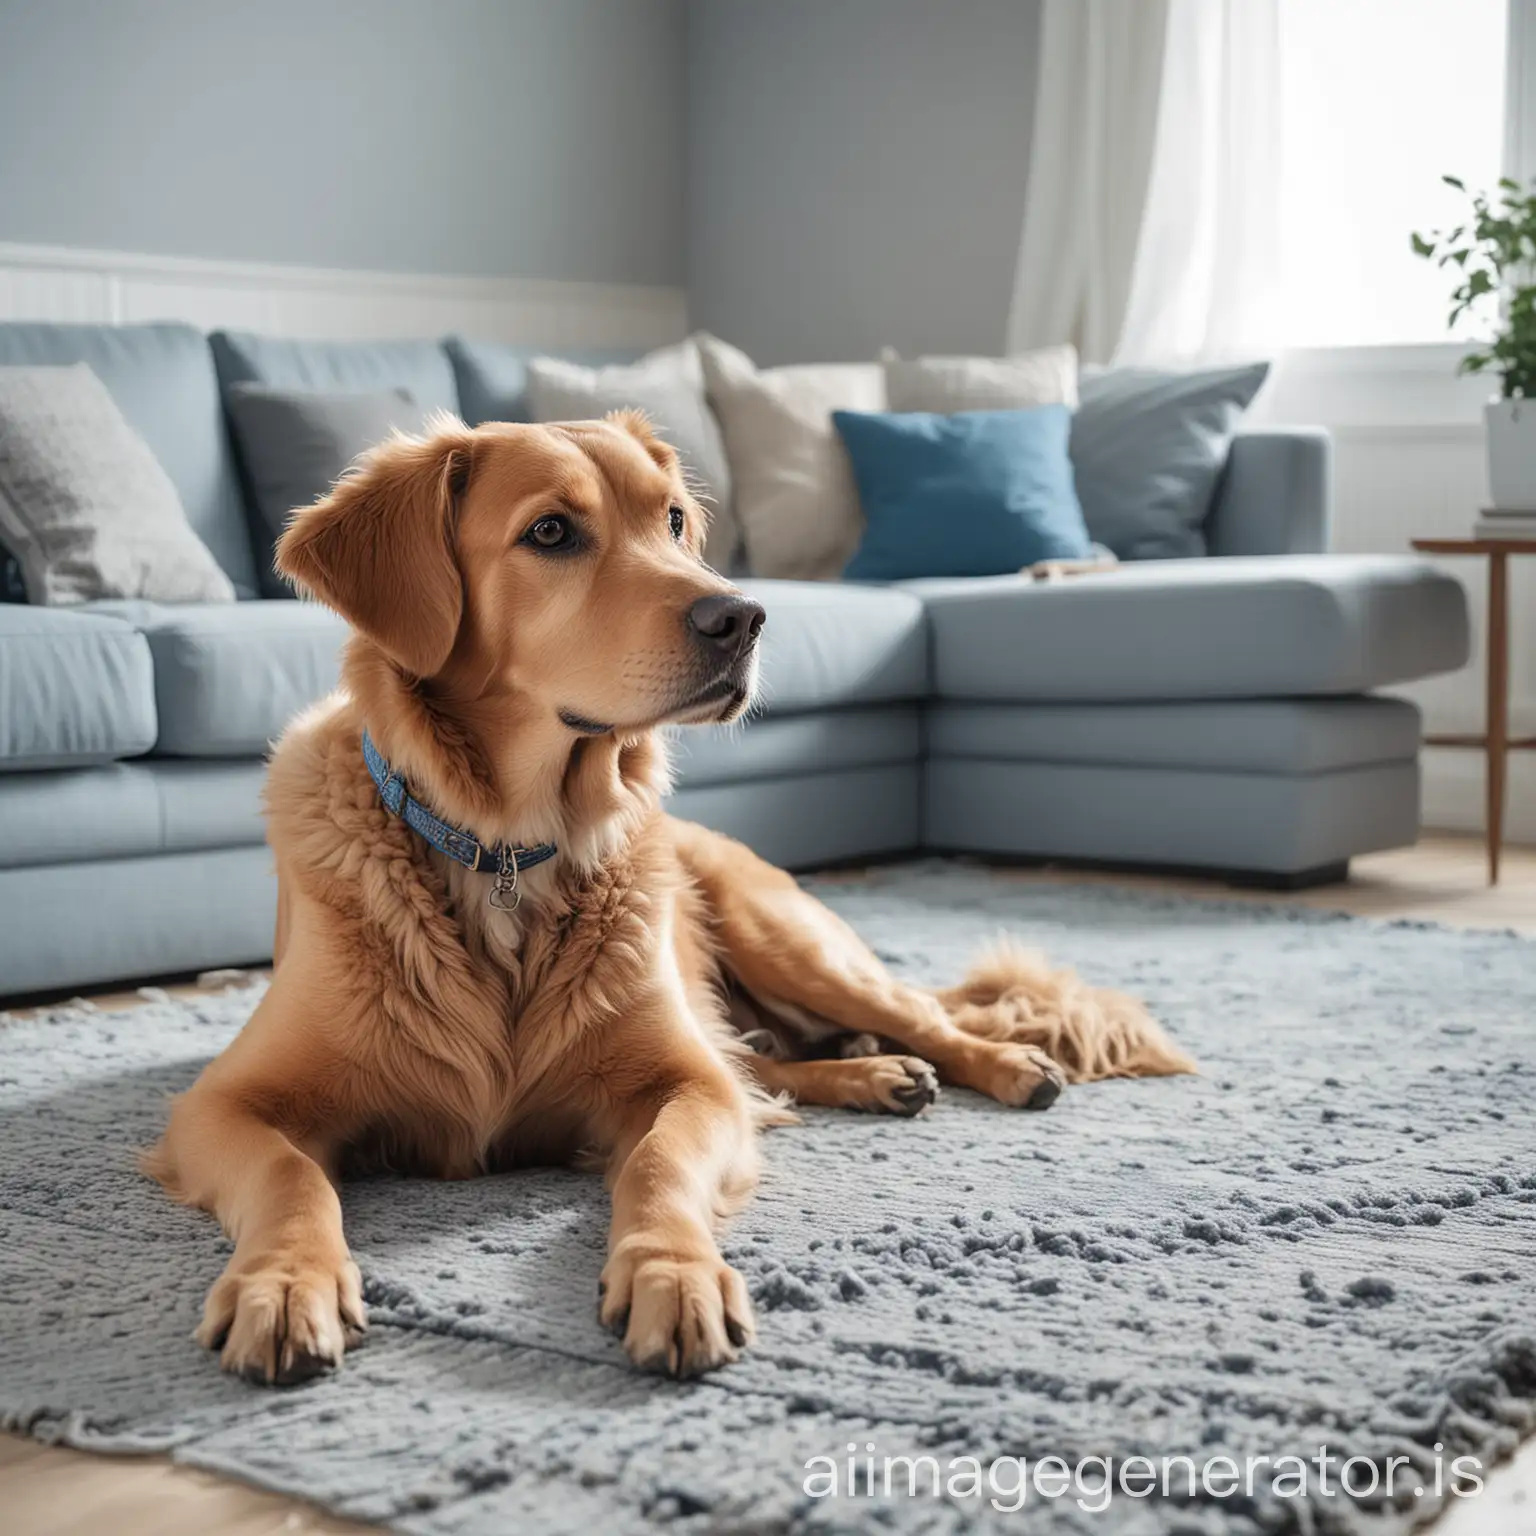 elegant living room, long couch, a large pet dog of light brown color sitting on the ground, blue, gray, white ambient color scheme, close-up full body shot, background blurred